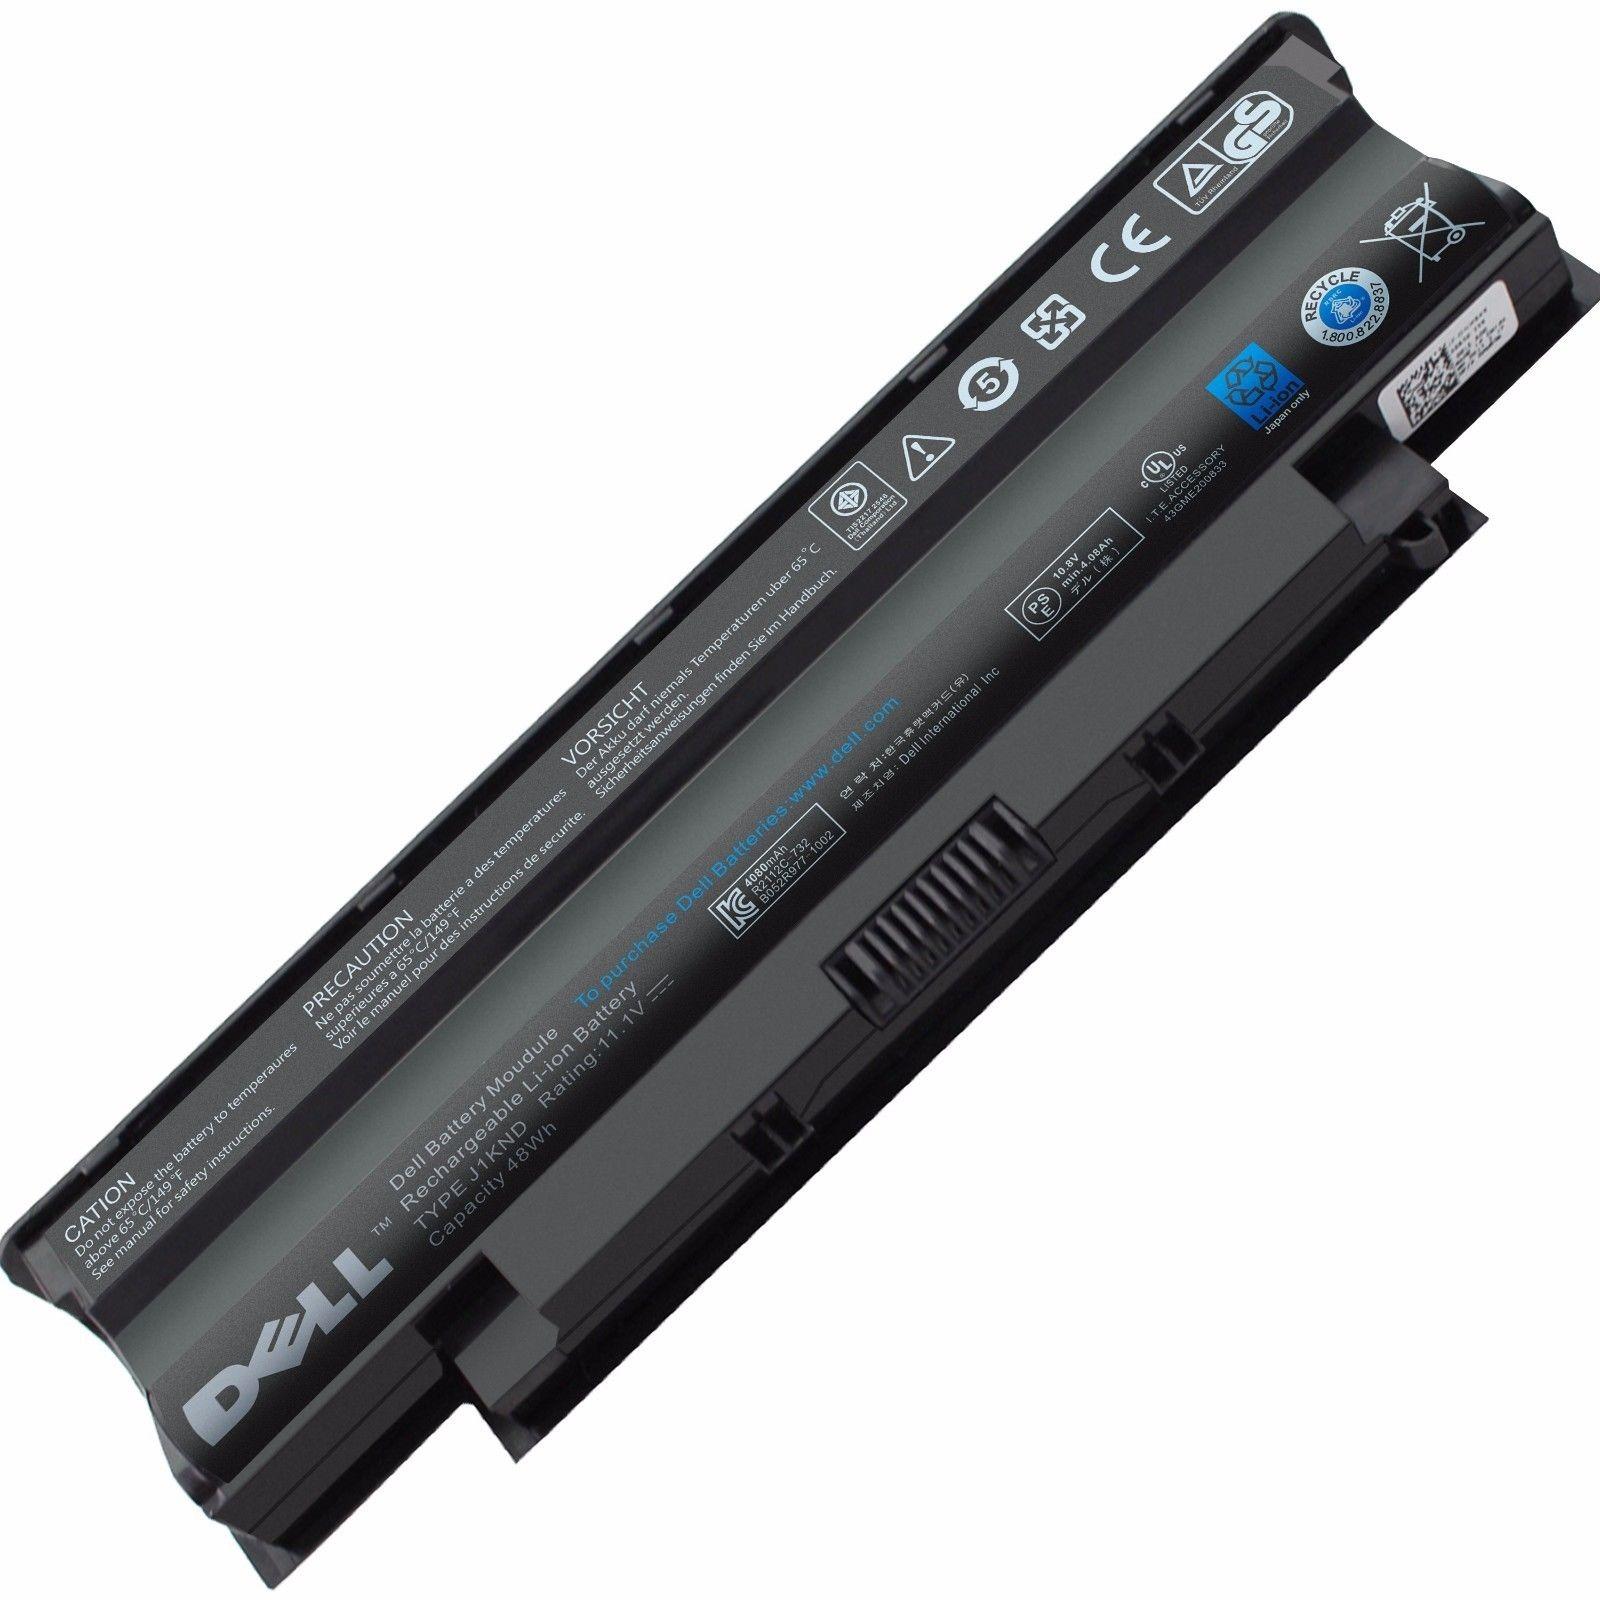 Dell battery. Аккумулятор dell j1knd. Аккумулятор для ноутбука dell j1knd. Dell батарея j1knd. Dell n5010-4010 j1knd.